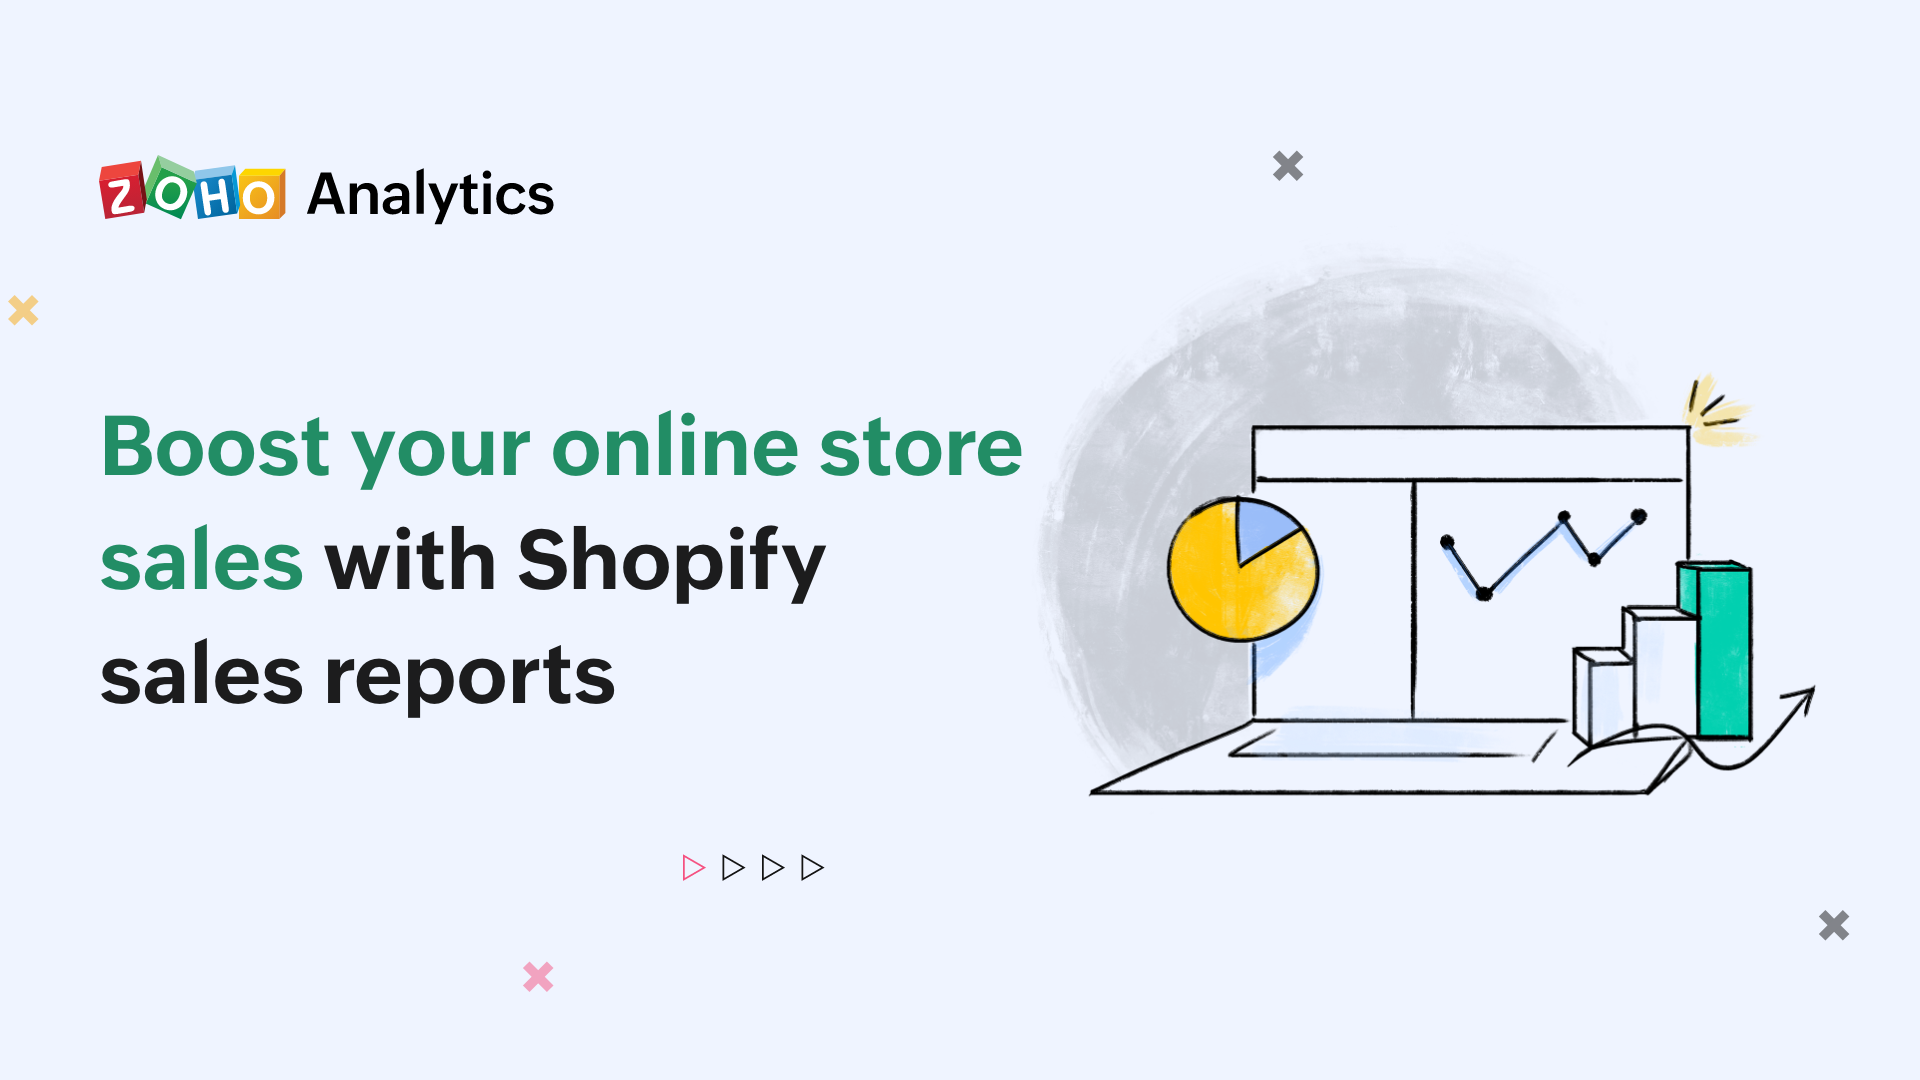 Boost your online store sales with Shopify sales reports - Zoho Blog